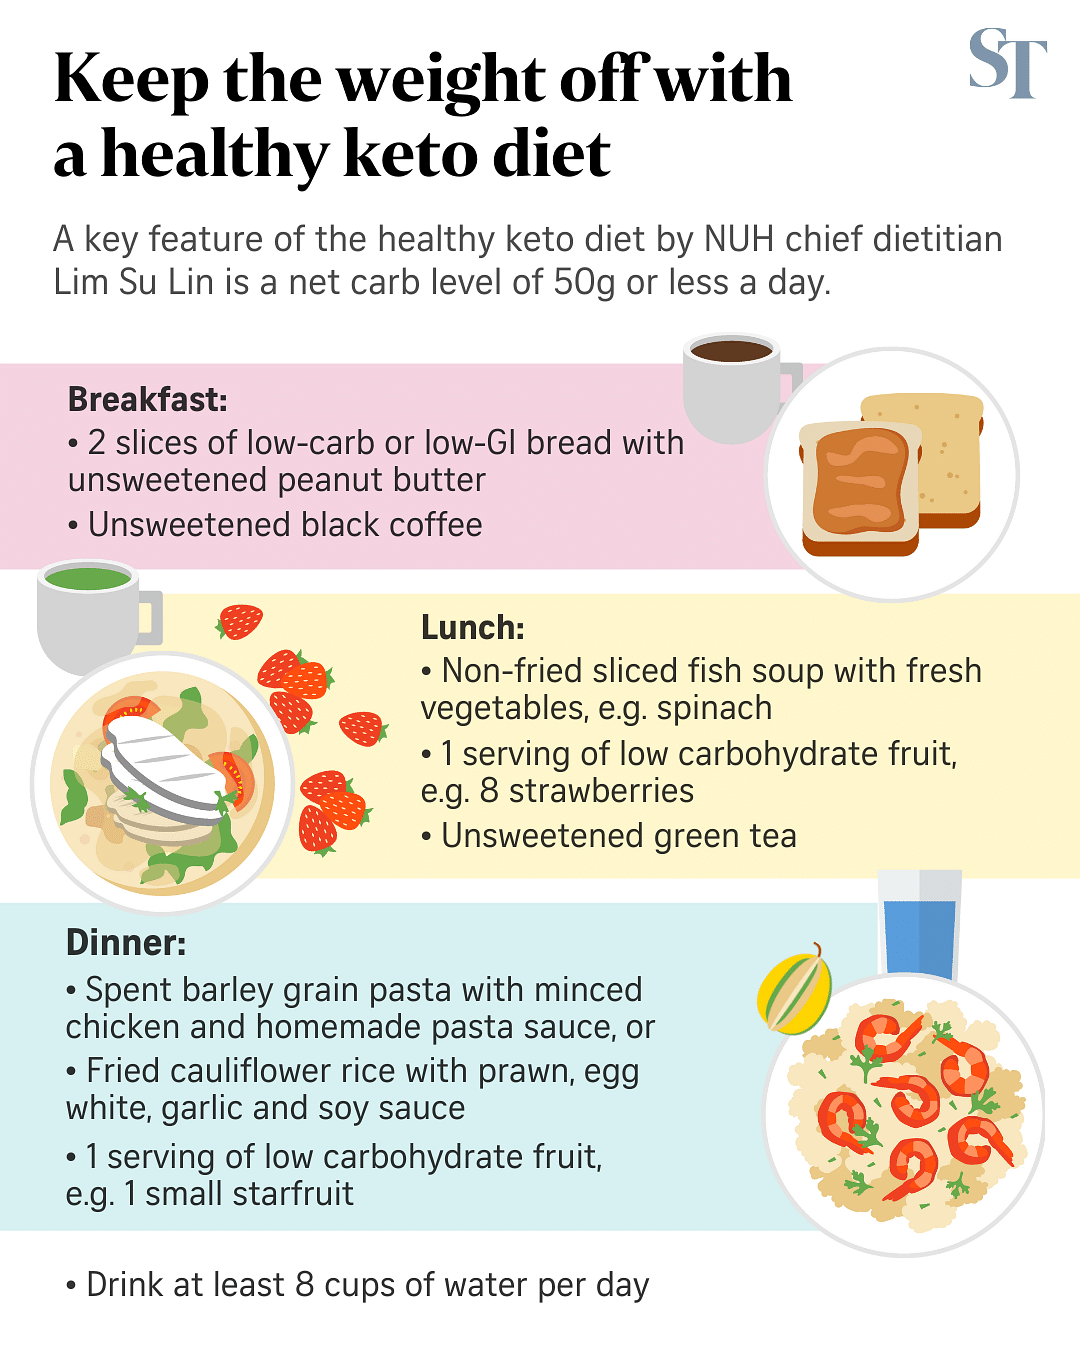 NUH's healthy keto diet leads to weight loss without increasing bad  cholesterol levels | The Straits Times